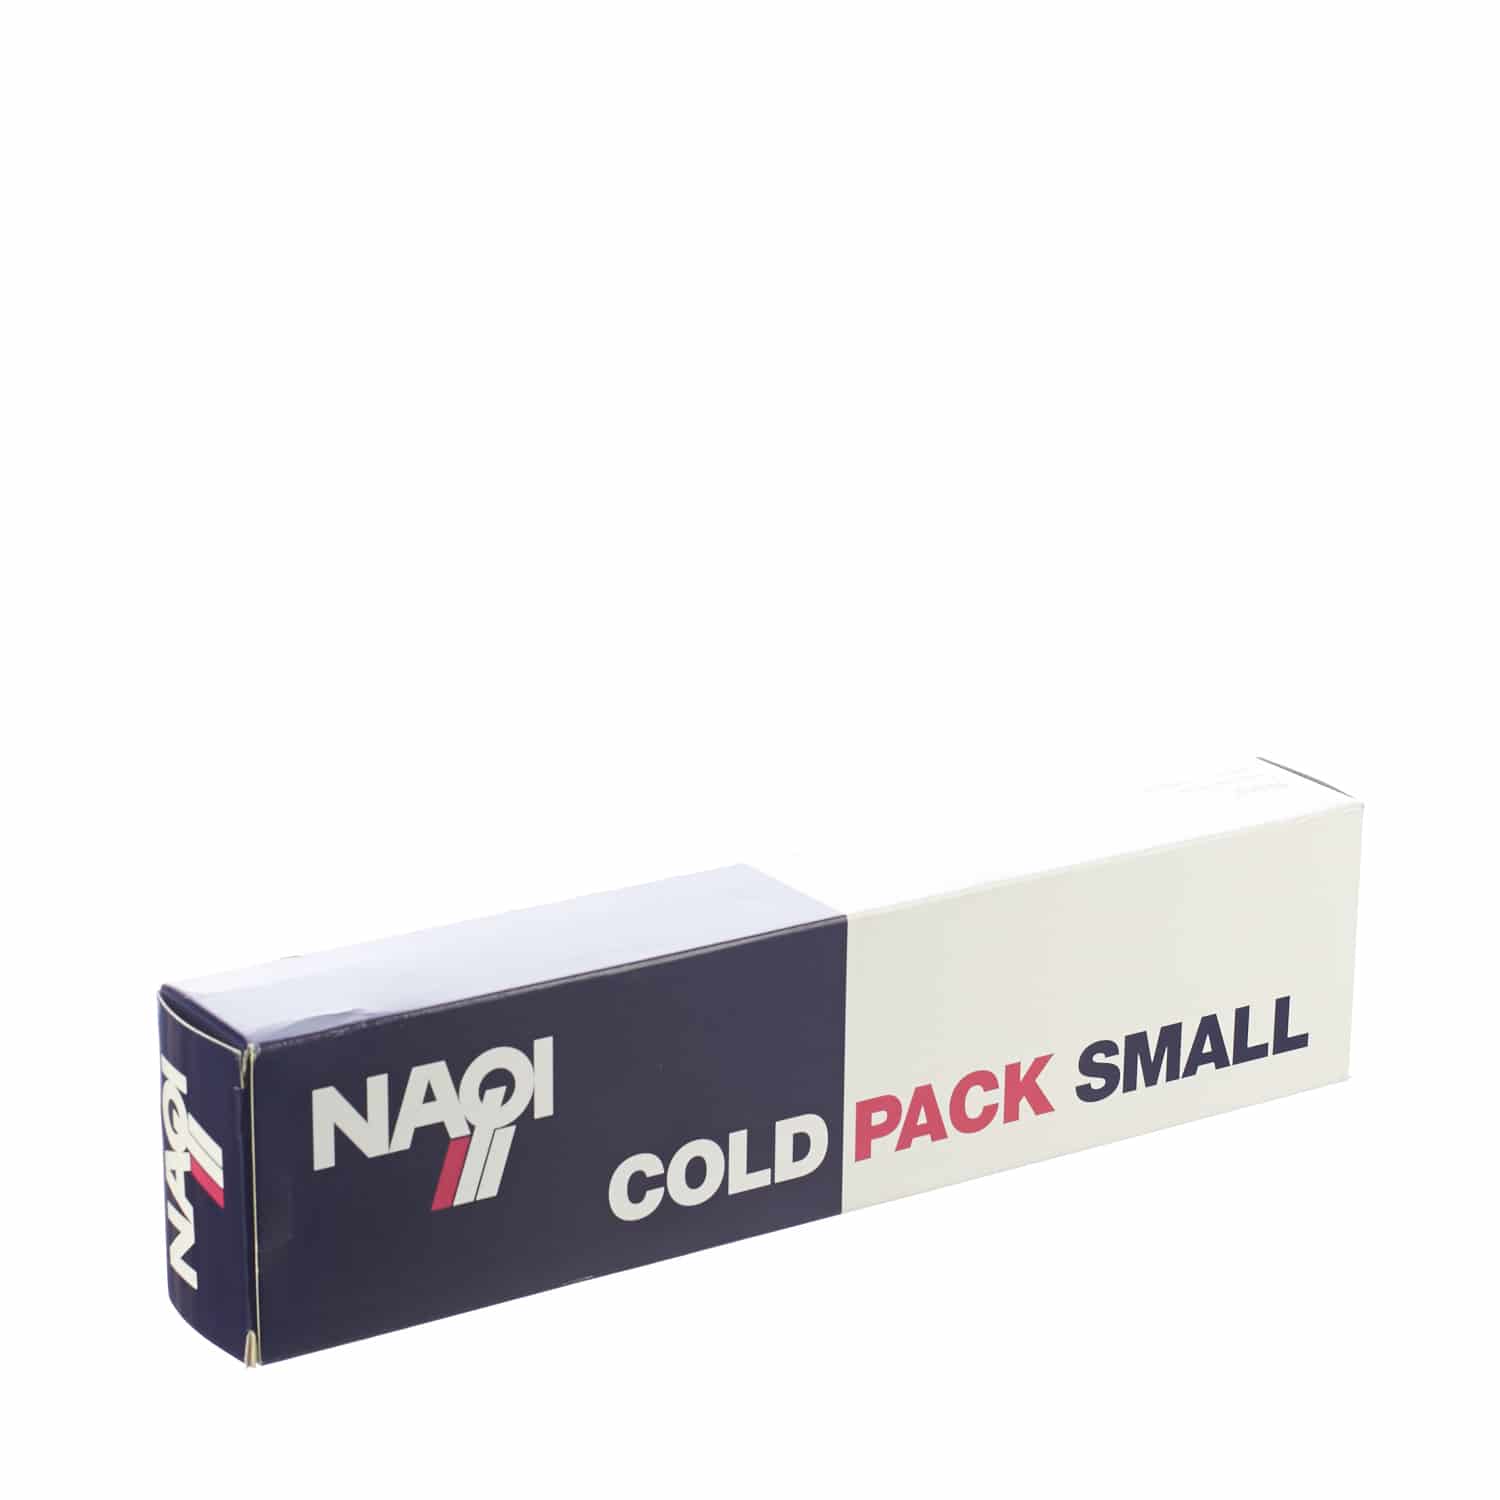 Naqi Cold Pack Small